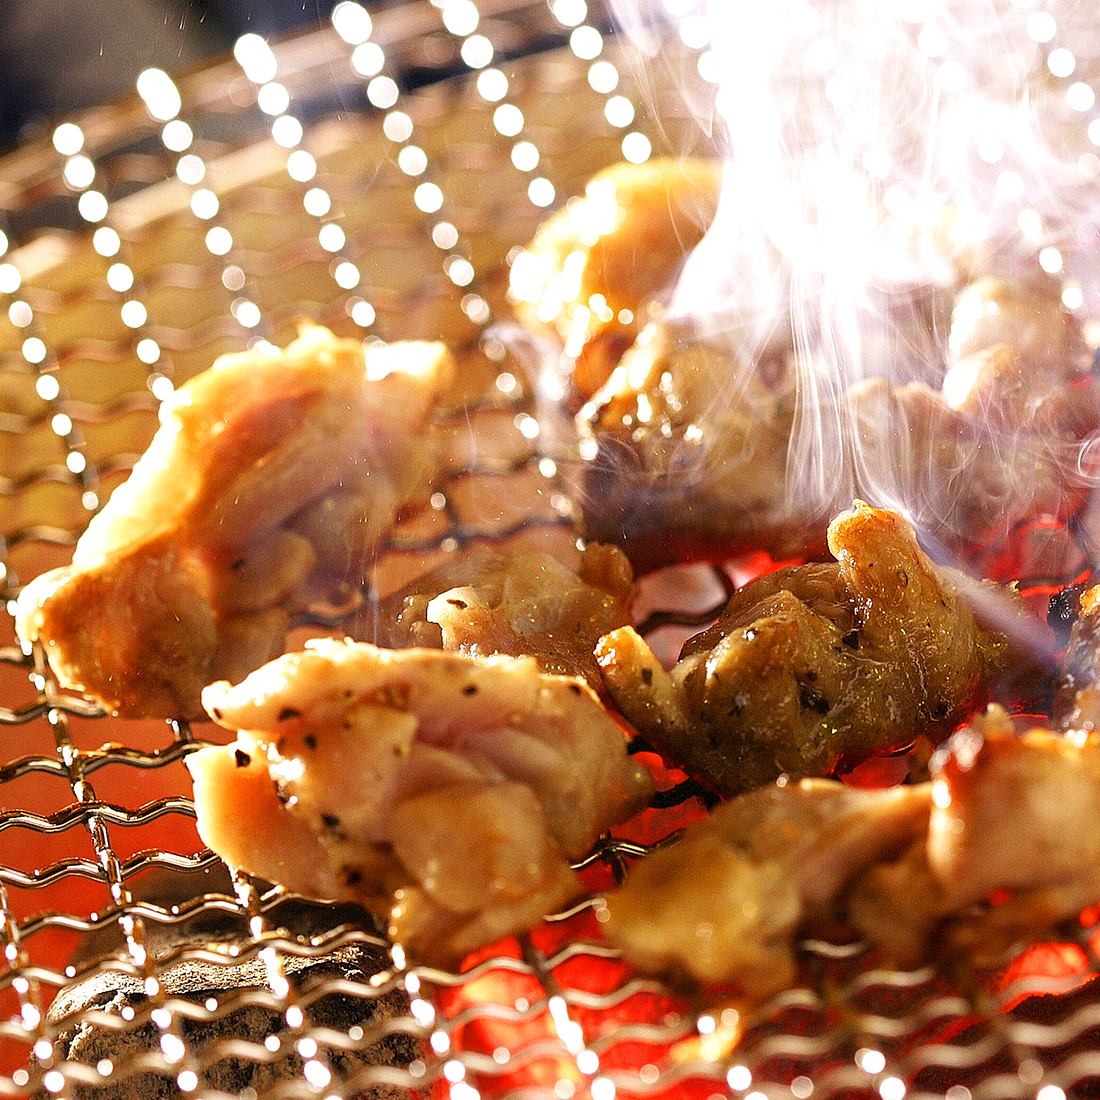 Enjoy selected charcoal grilled styles such as carefully selected local chickens and military chickens!